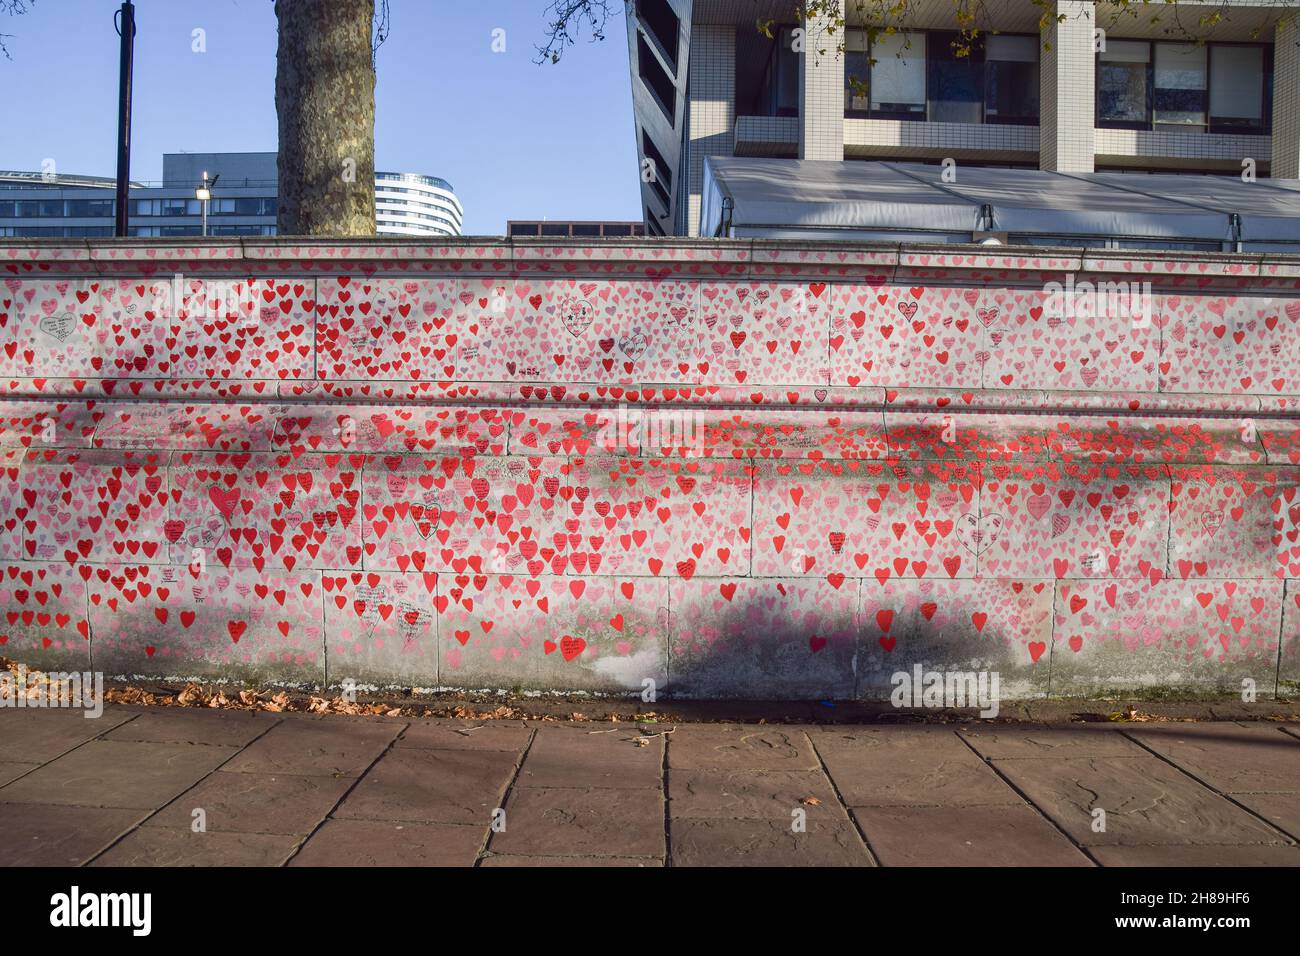 Red hearts are seen on the National COVID Memorial Wall outside St Thomas' Hospital.Over 150,000 red hearts have been painted by volunteers and members of the public, one for each life lost to coronavirus in the UK to date. (Photo by Vuk Valcic / SOPA Images/Sipa USA) Stock Photo